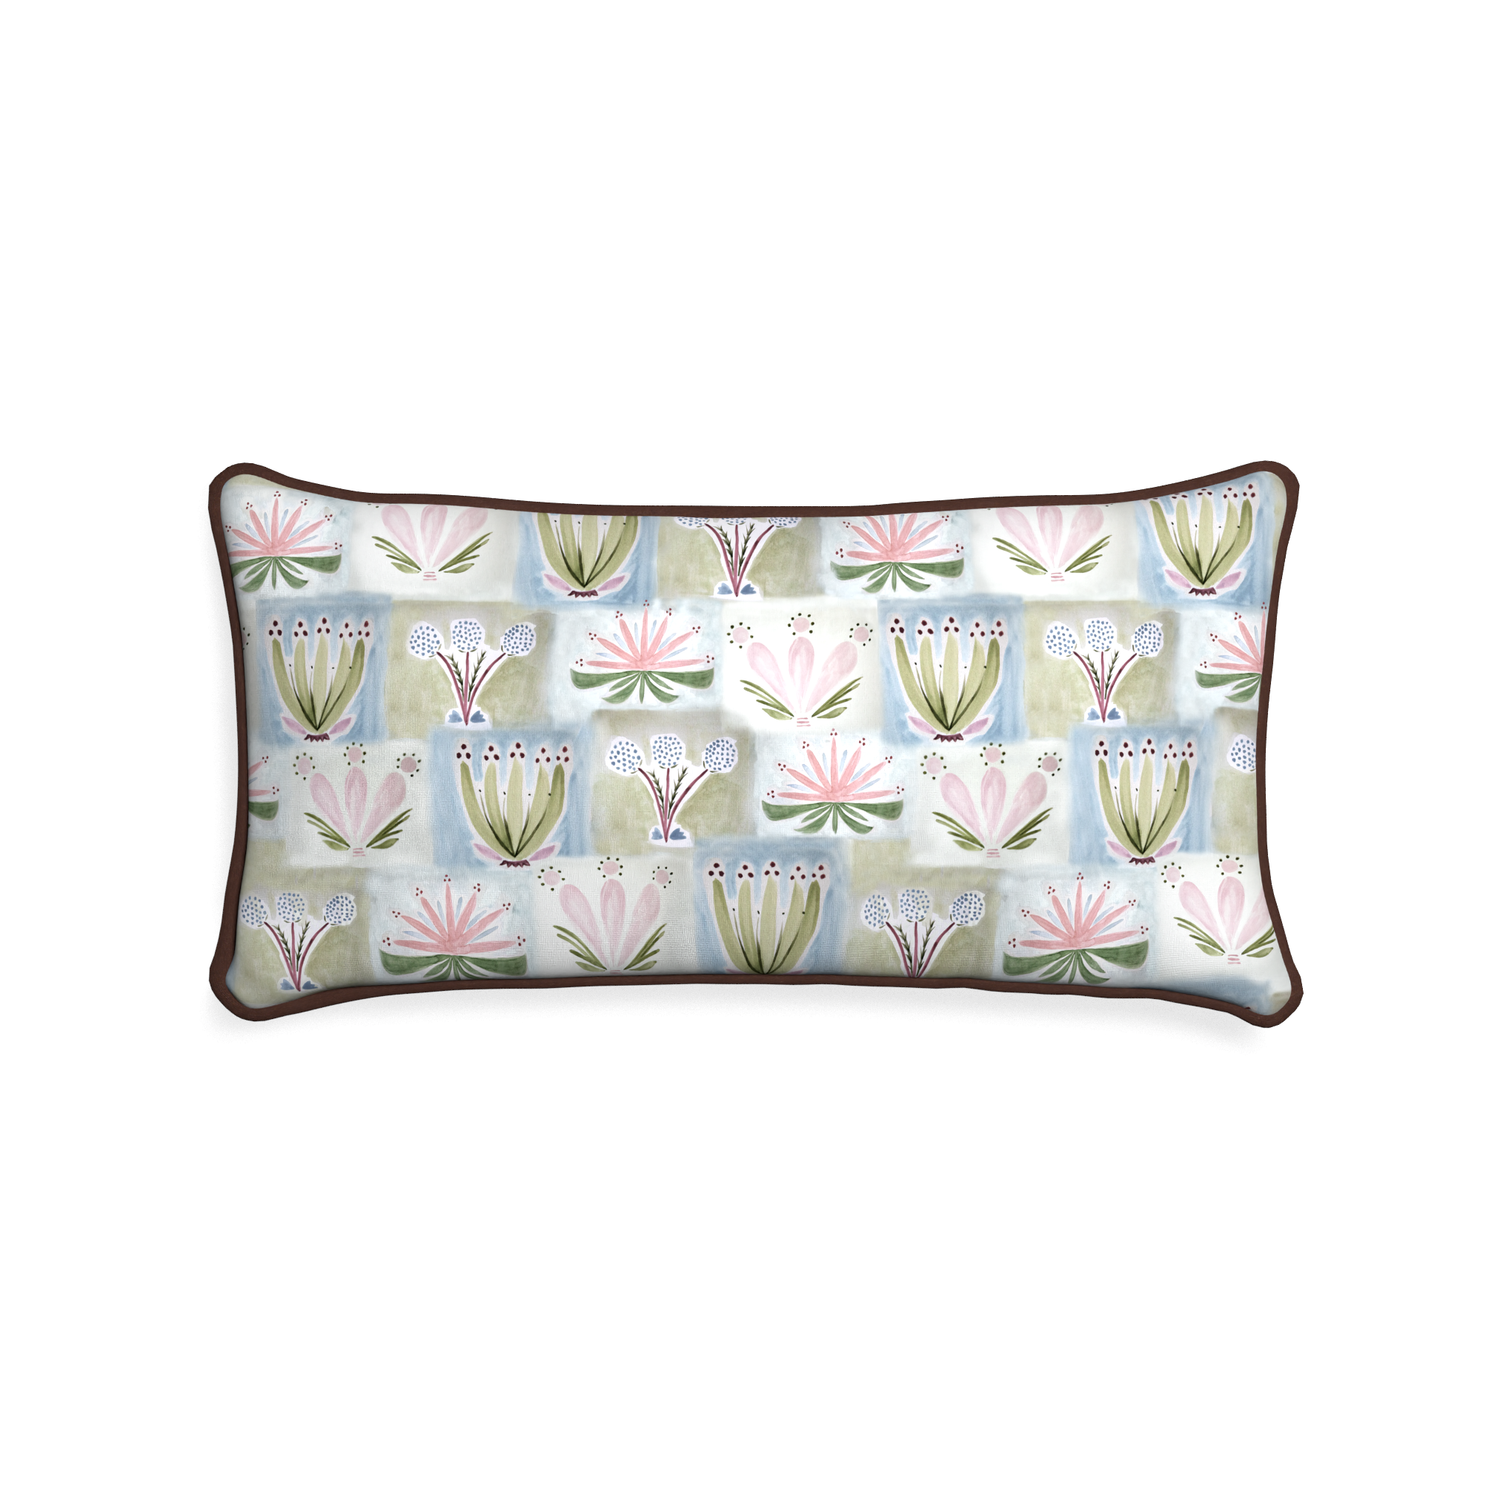 Midi-lumbar harper custom hand-painted floralpillow with w piping on white background